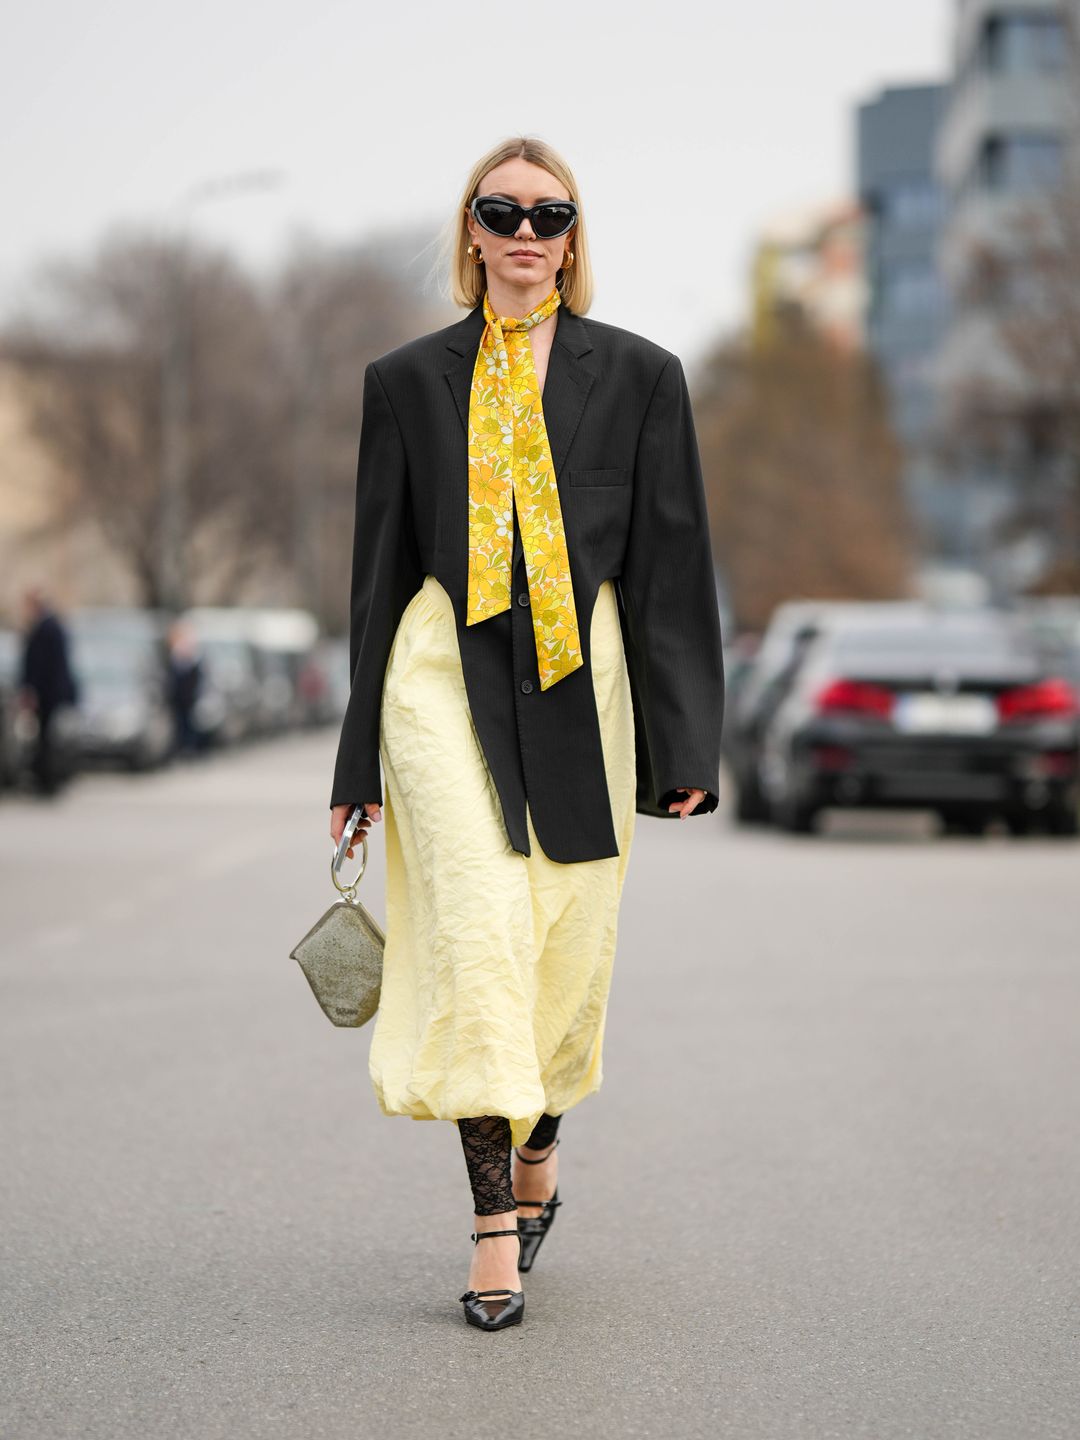 Woman wearing black blazer over yellow dress and lace footless tights